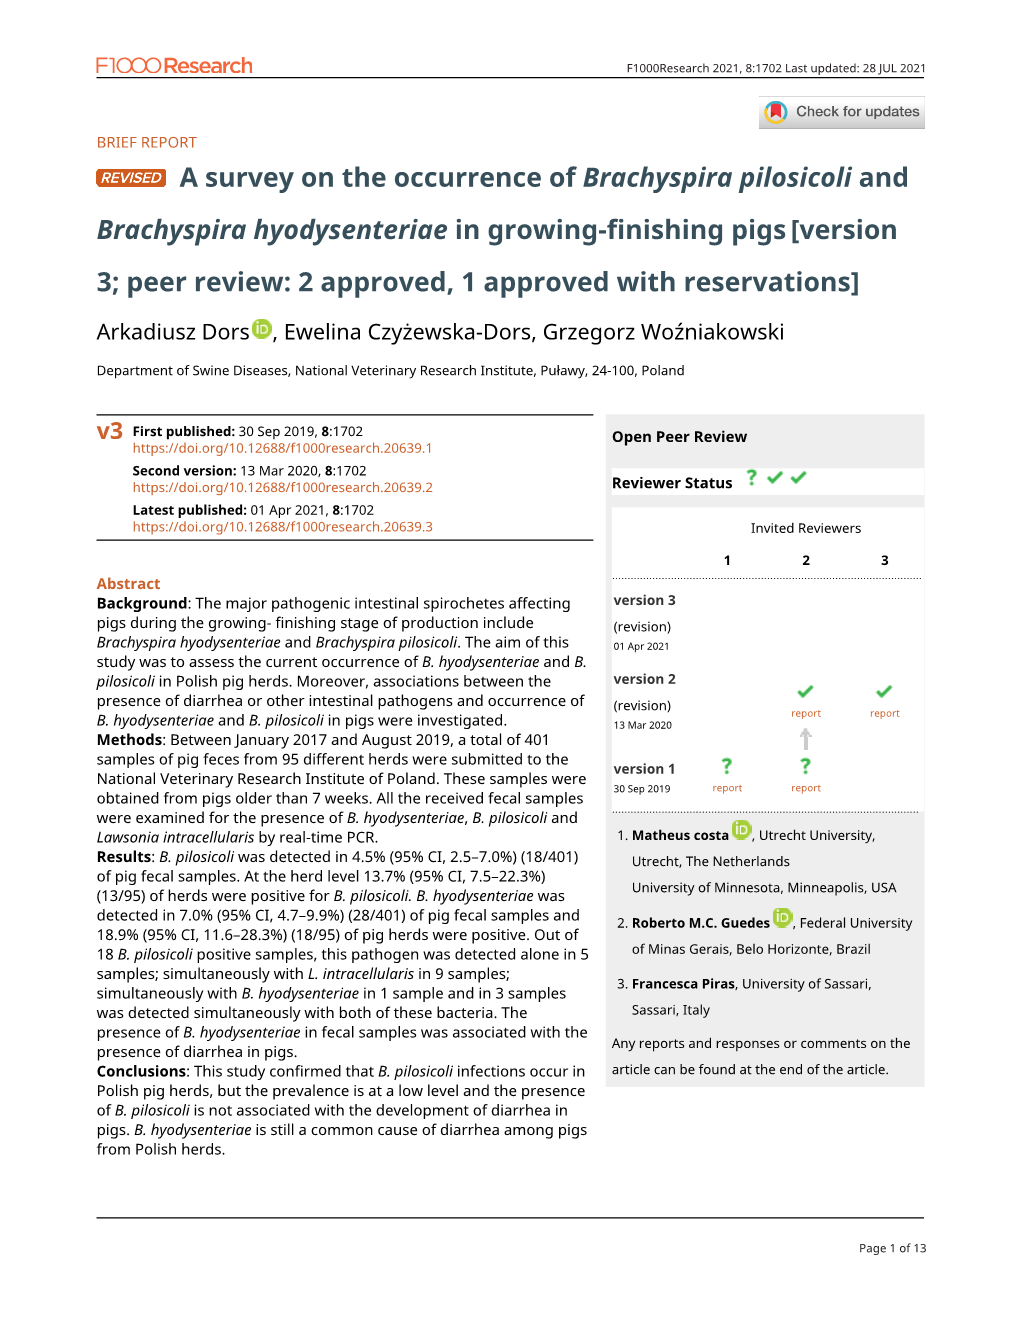 A Survey on the Occurrence of Brachyspira Pilosicoli And